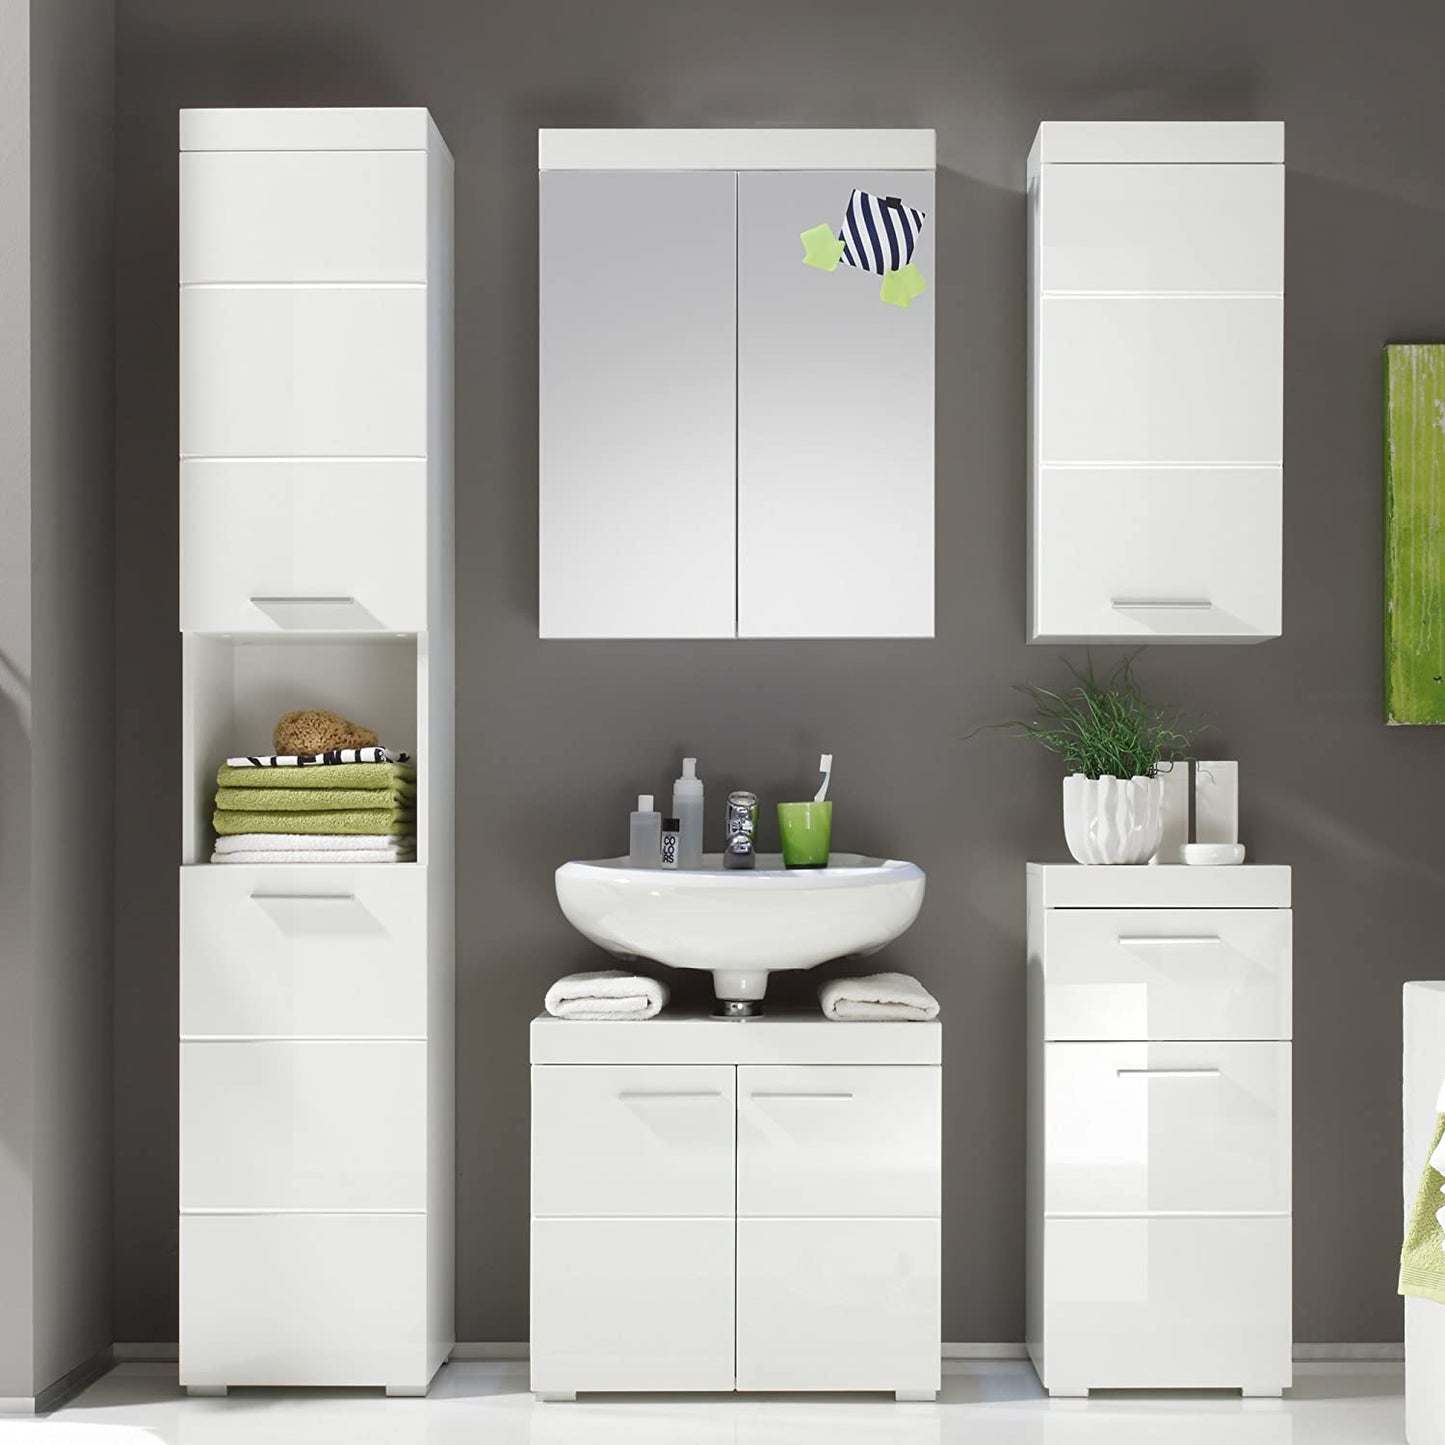 Nancy's Amanda Bathroom Cabinet - High Cabinet with Open Compartment - High Gloss - 37 x 190 x 31 cm